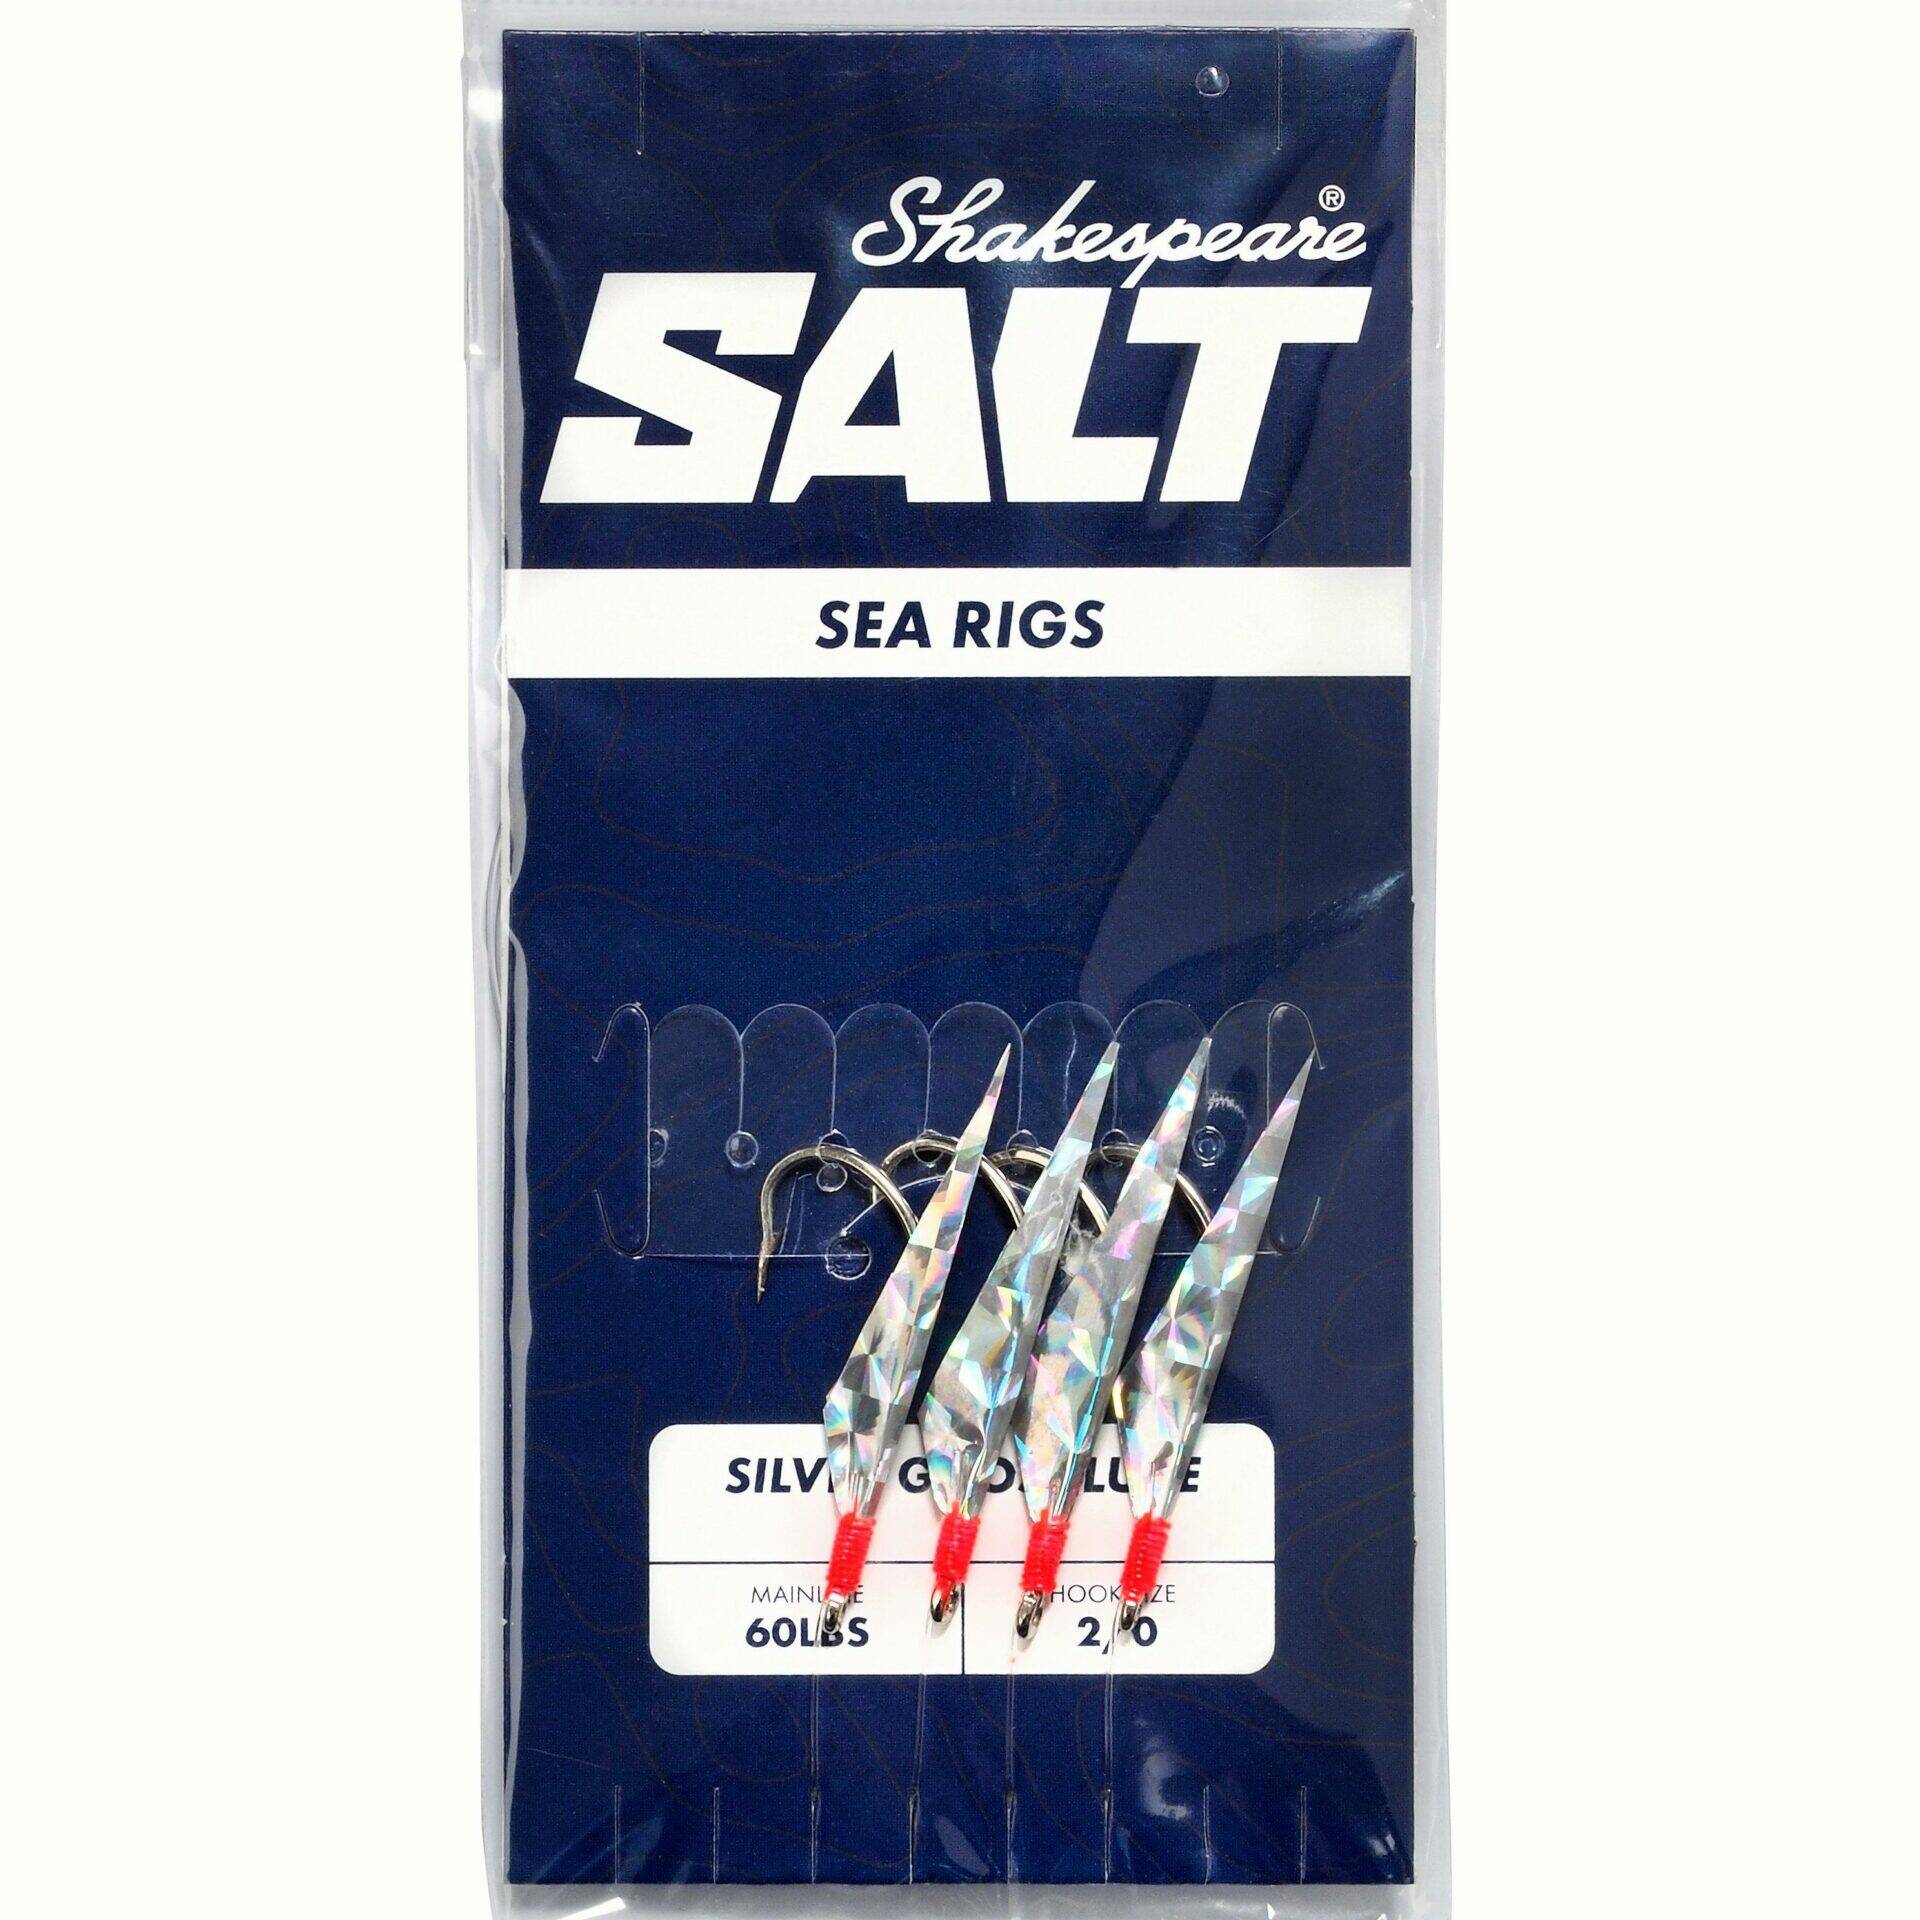 Shakespeare Salt Rig Silver Ghost Lure 2/0